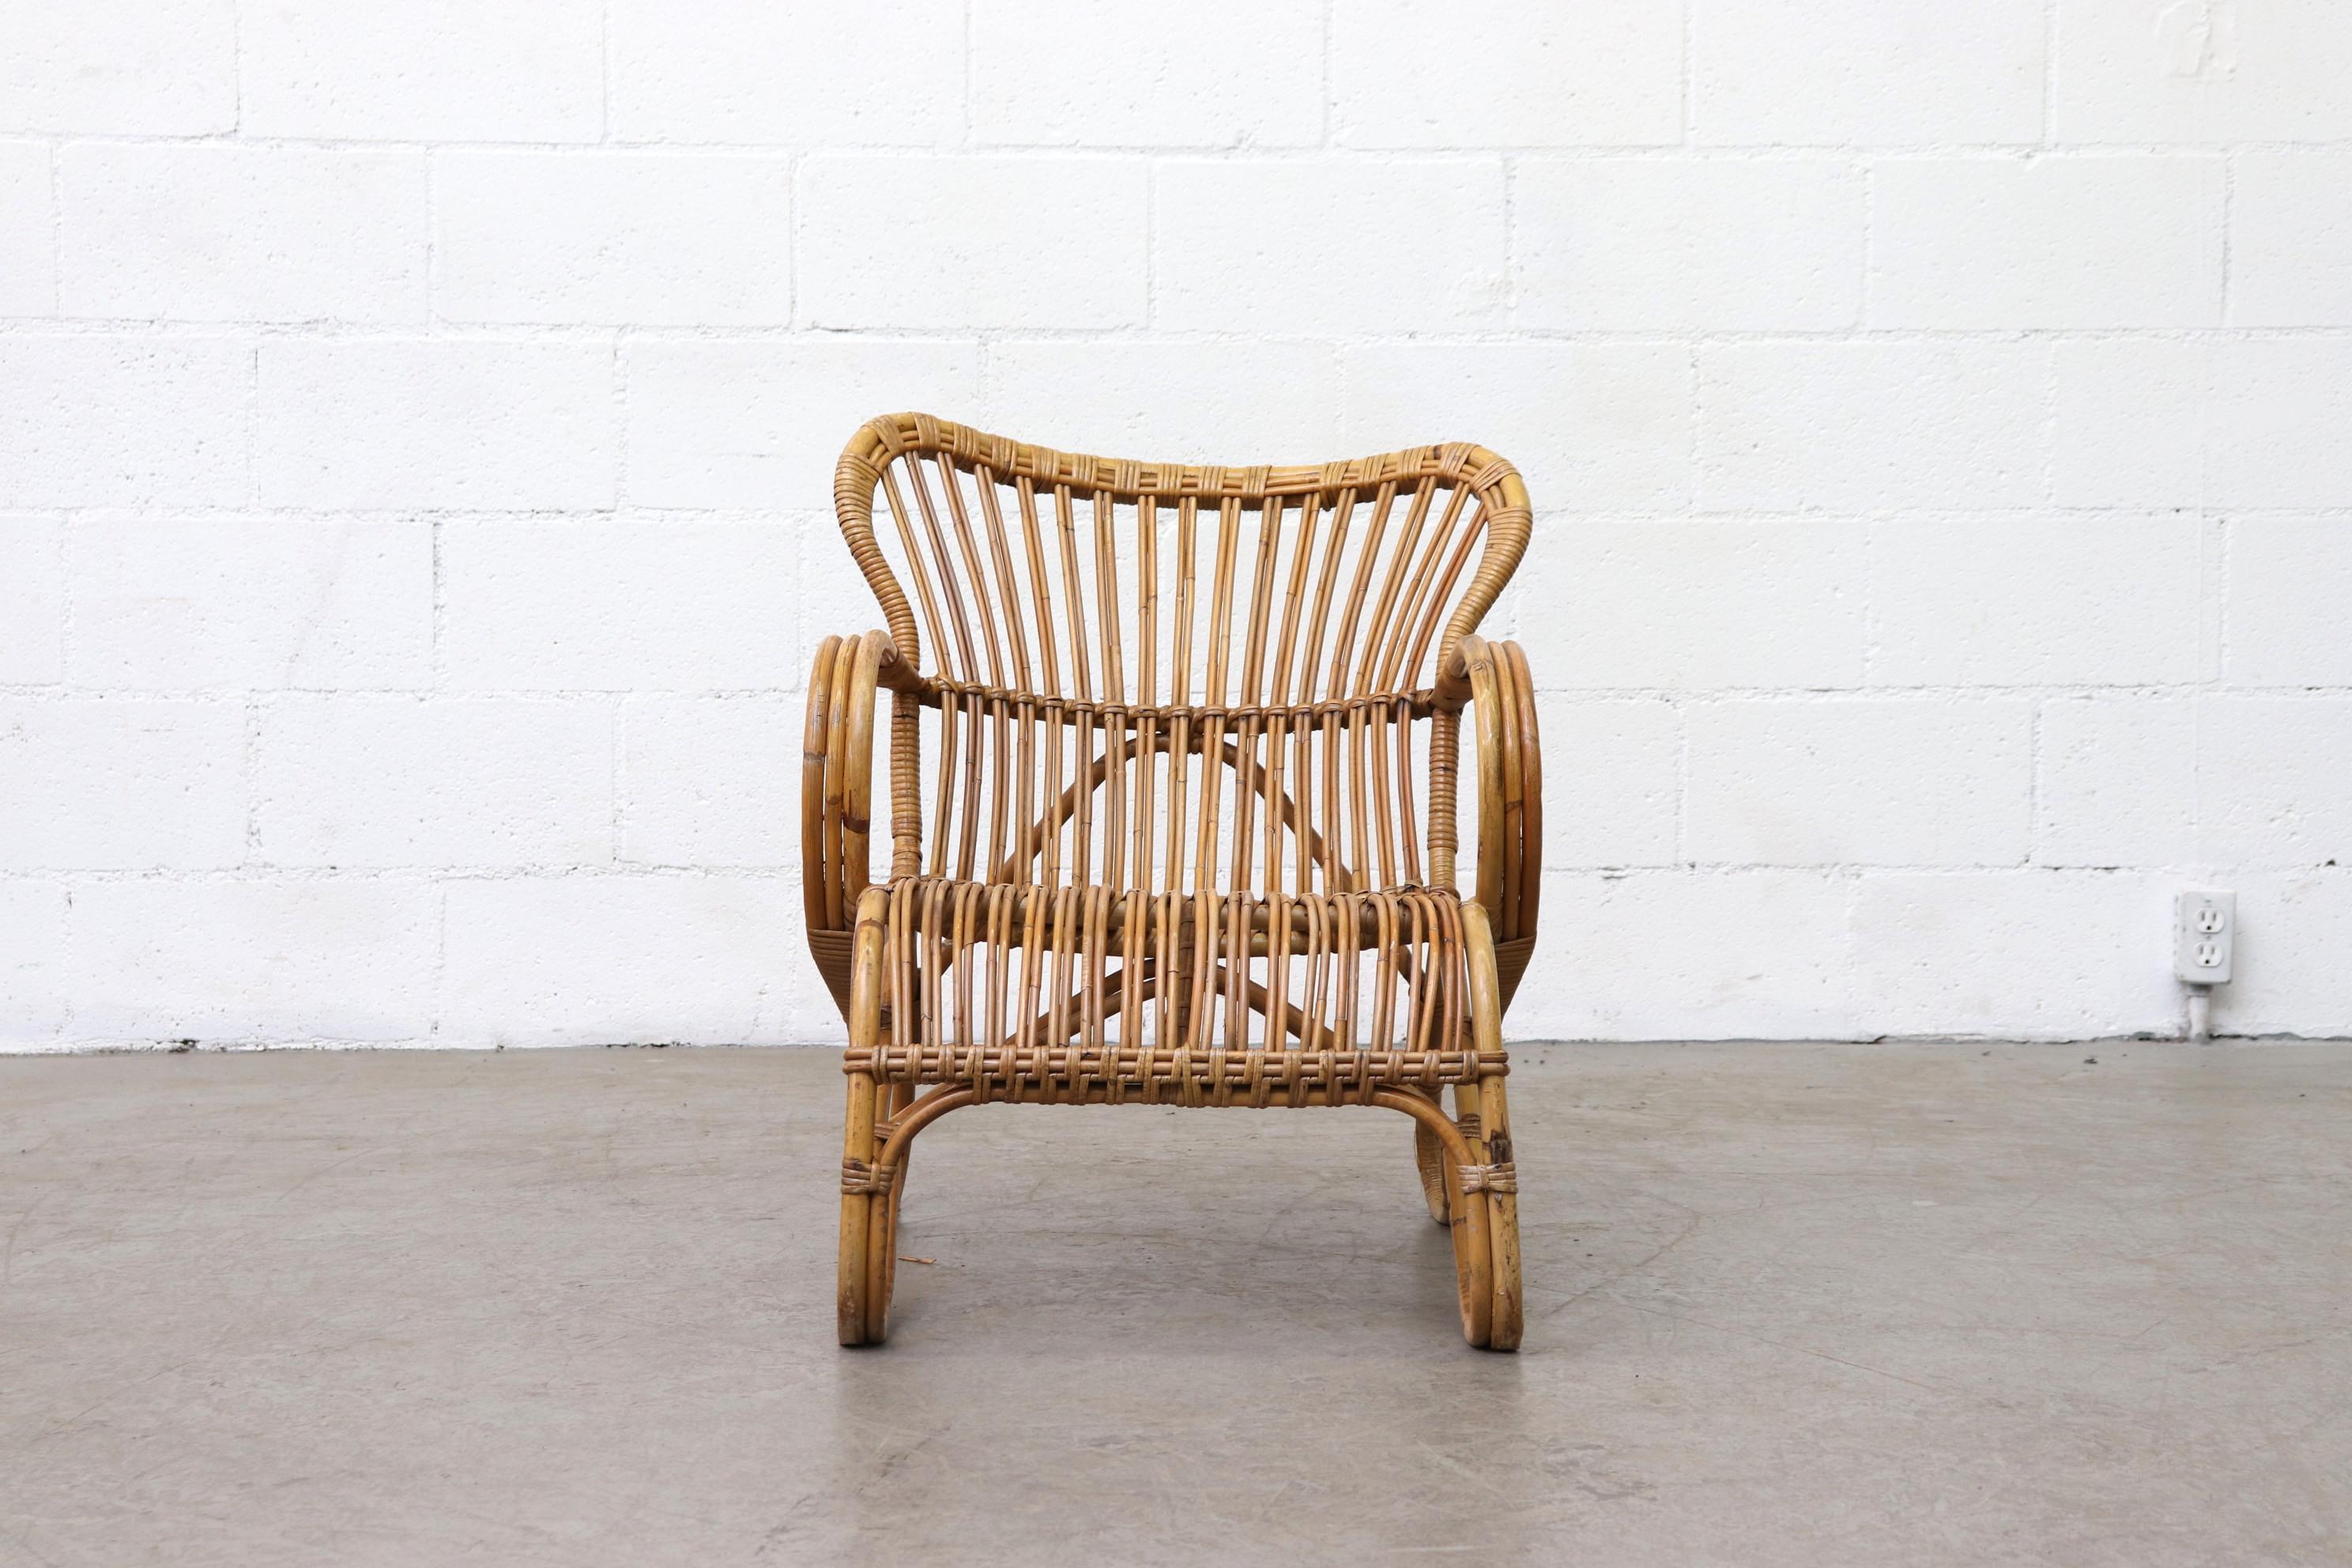 Low Midcentury bamboo rattan lounge chair. In original condition with visible signs of wear, including slight lean and shaved down feet. All wear is consistent with age and use. Other similar bamboo chairs available, listed separately.